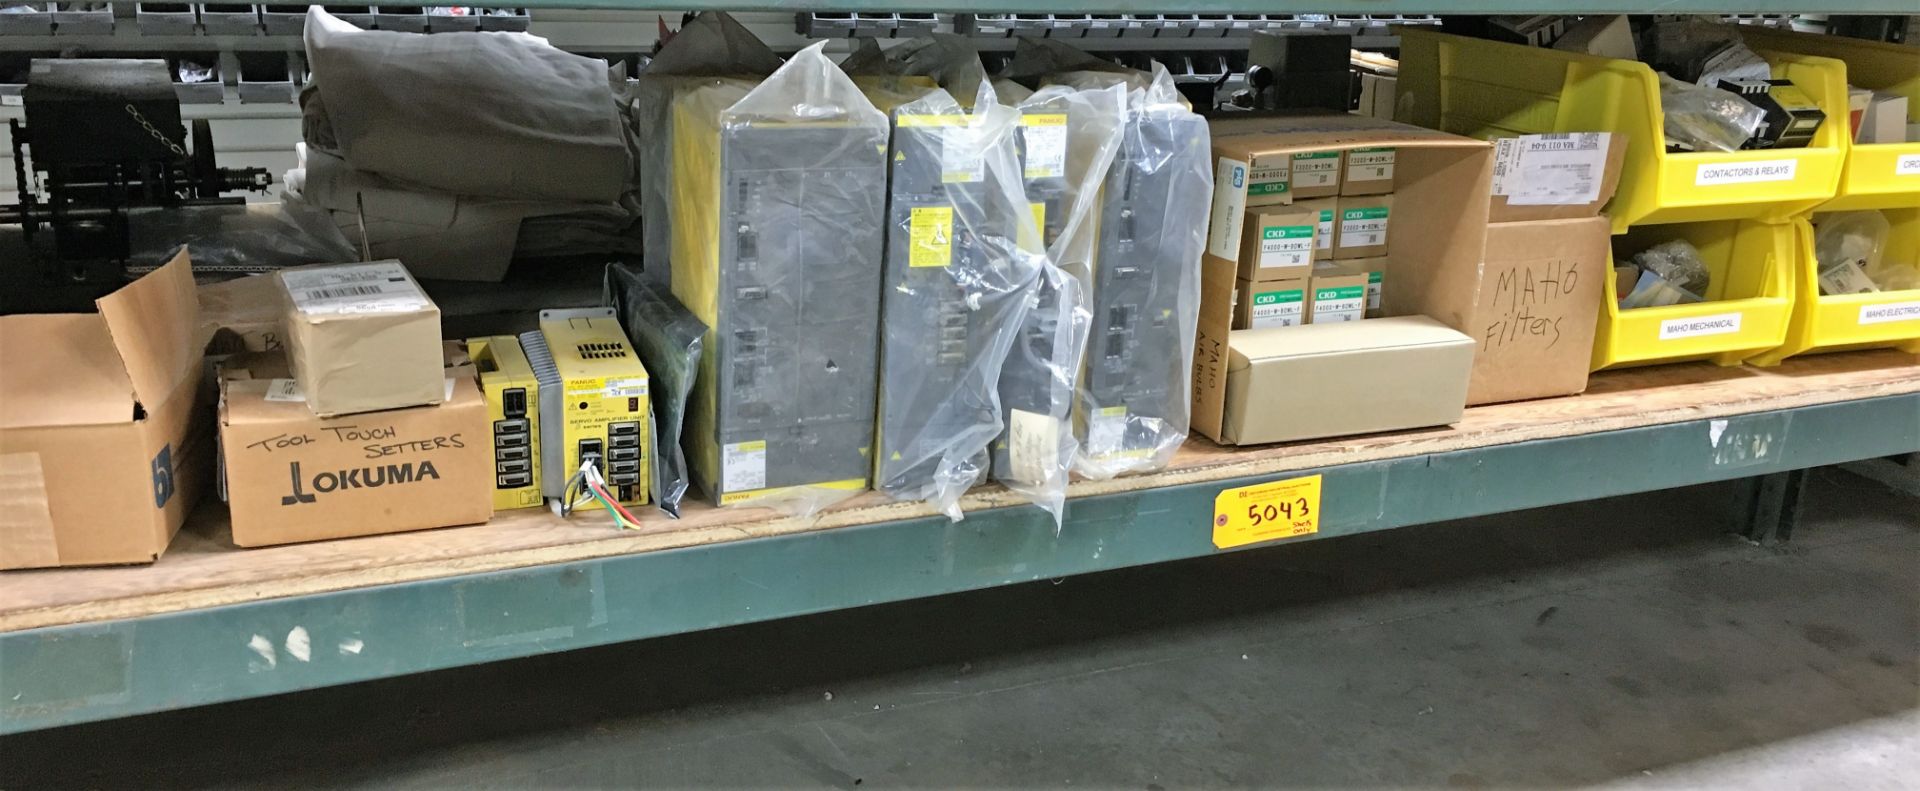 CONTENTS OF SHELF: FANUC PARTS, RELAYS, CIRCUIT BREAKERS & OTHER MACHINE PARTS